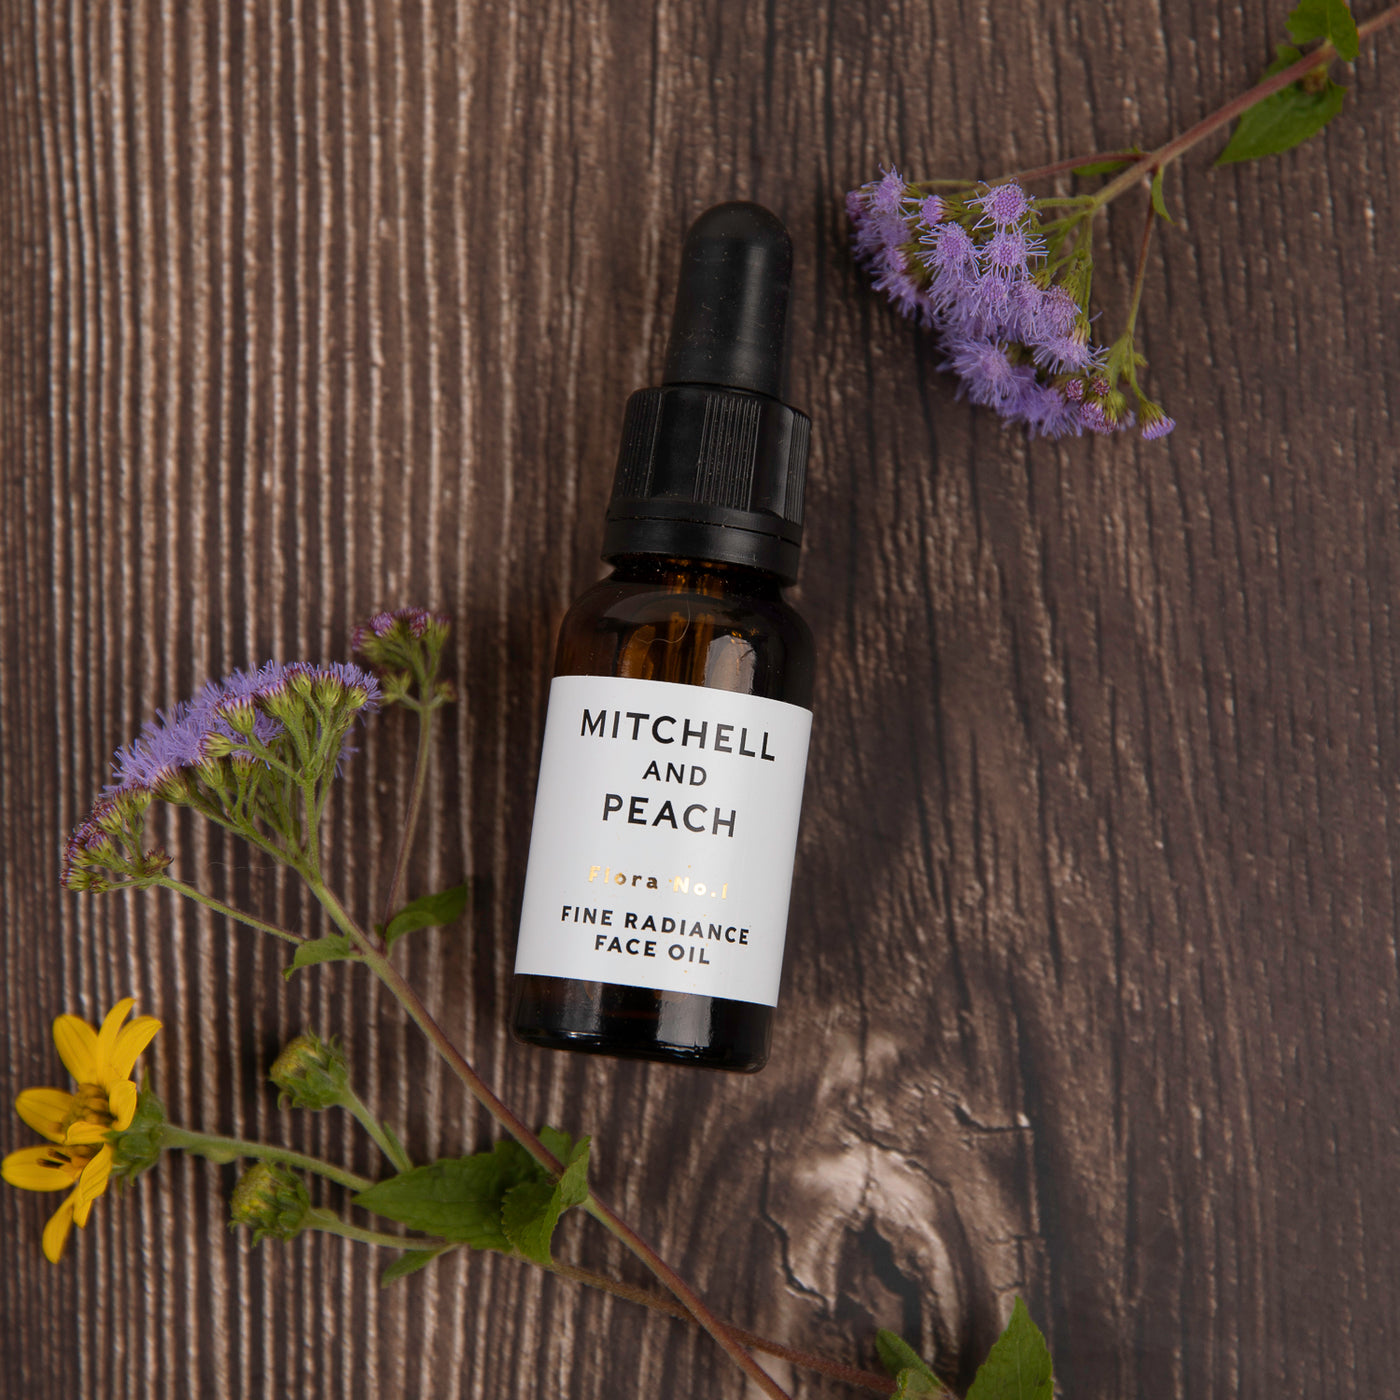 MITCHELL AND PEACH FINE RADIANCE FACE OIL